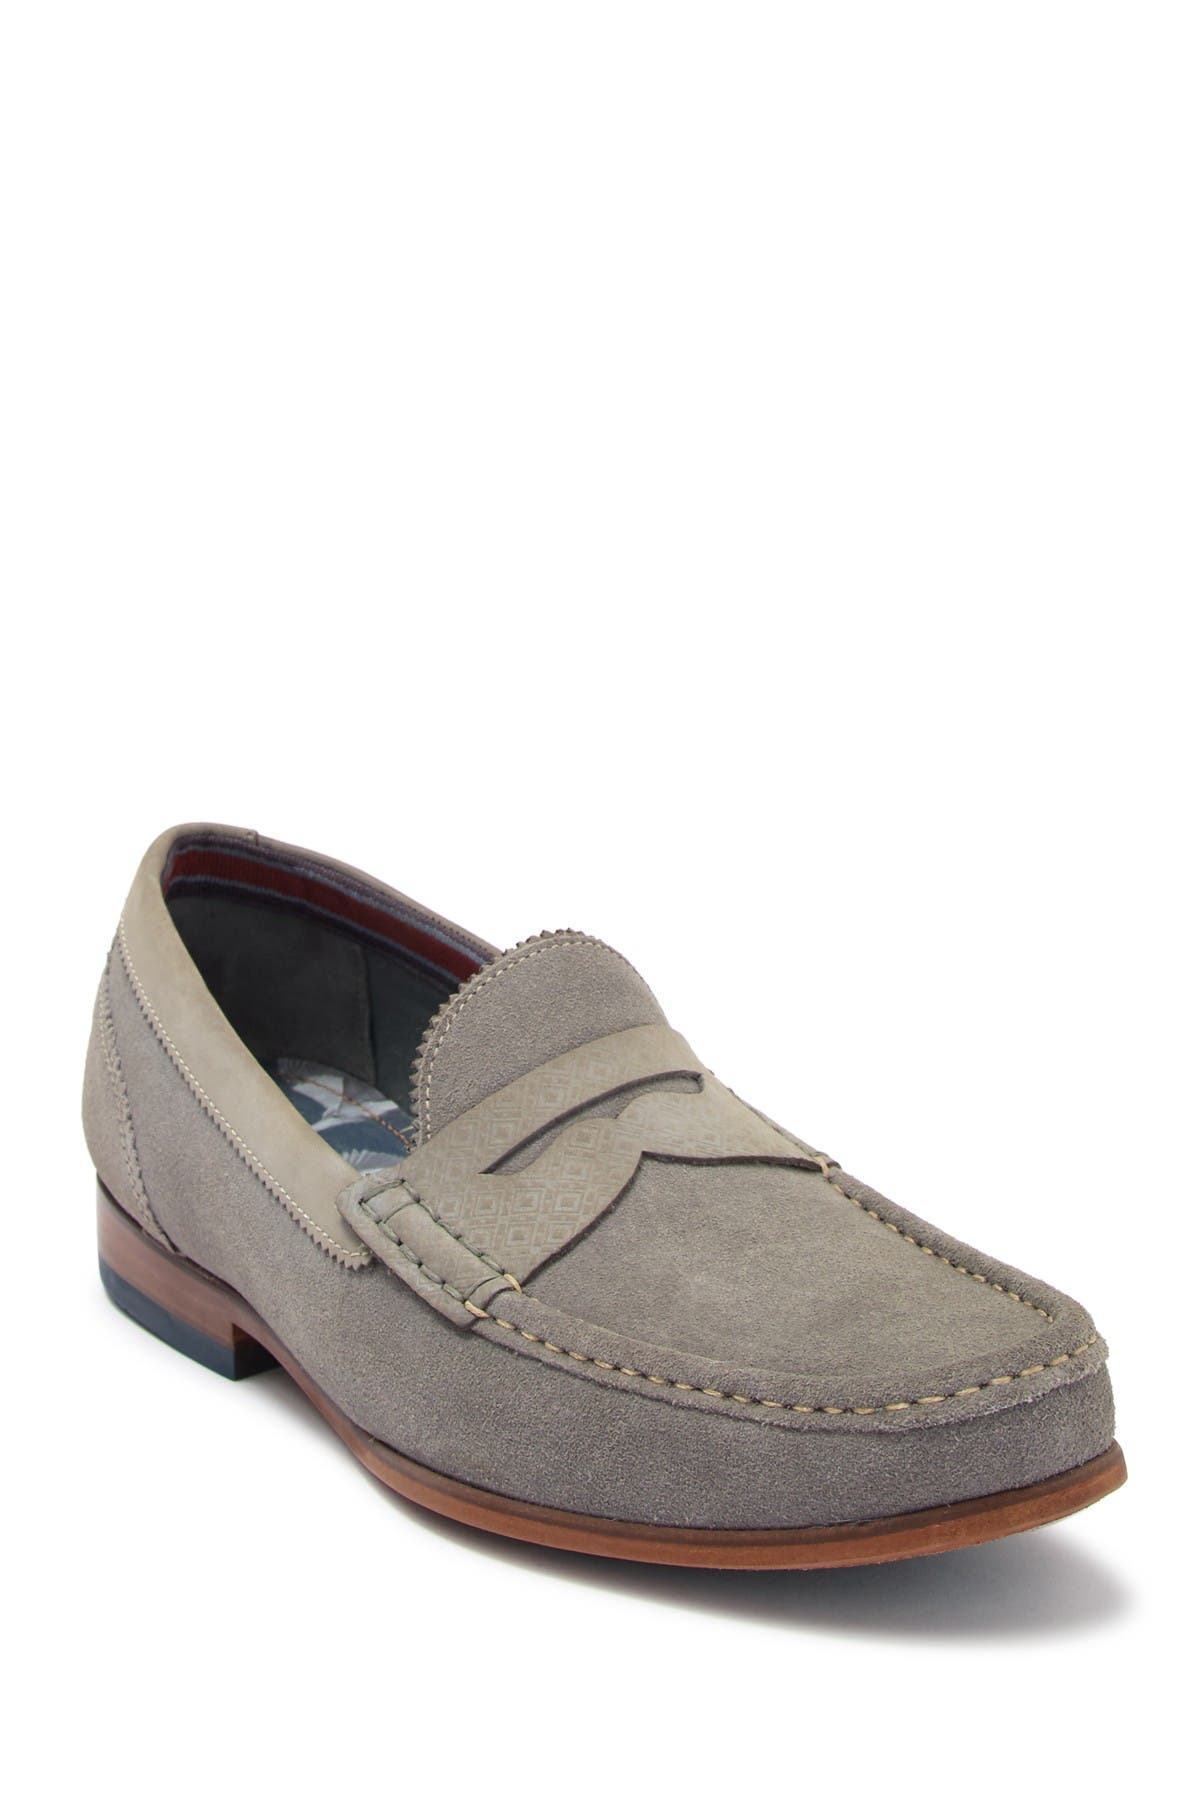 ted baker kids loafers